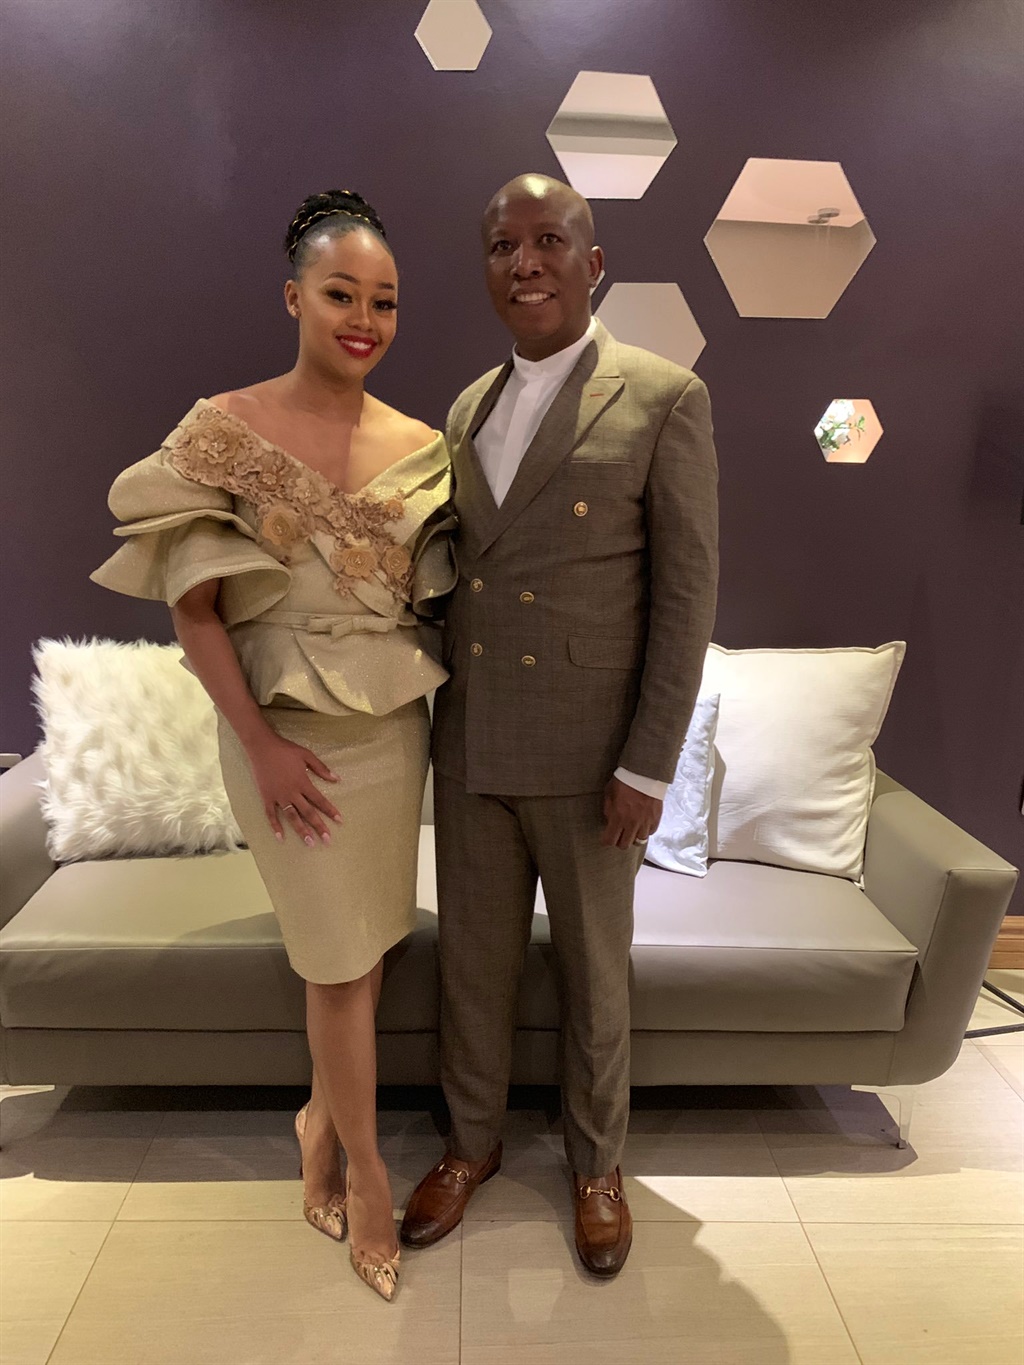 EFF leader Julius Malema posted a picture of himself and wis wife Mantwa on twitter, and people loved it.